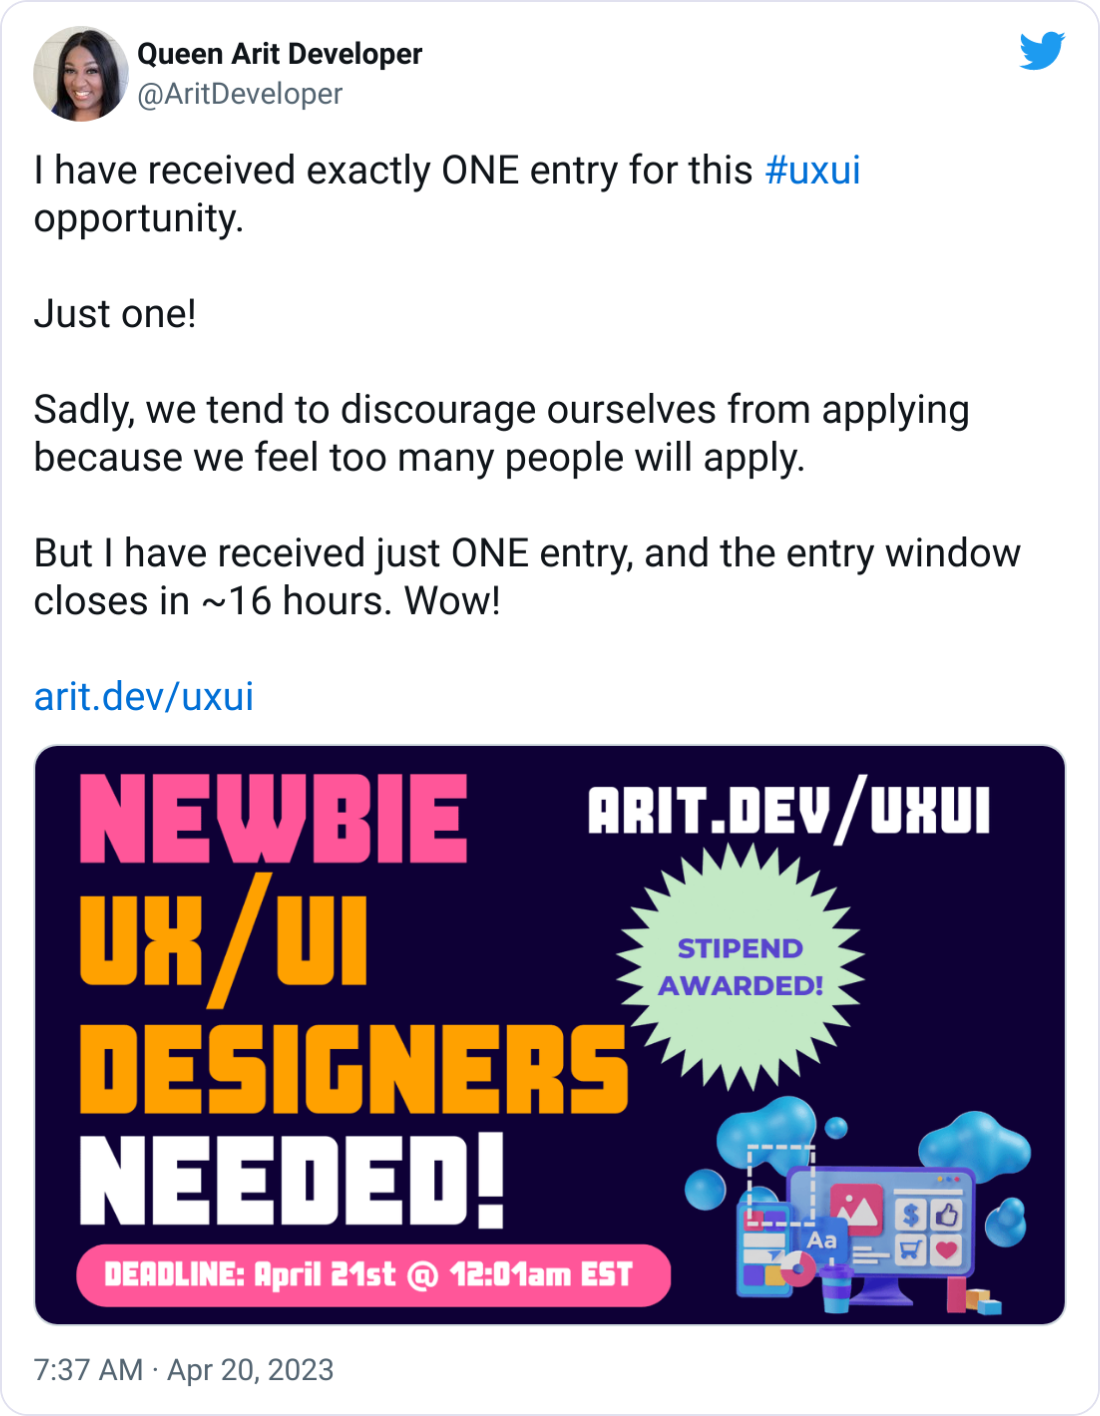 Queen Arit Developer @AritDeveloper I have received exactly ONE entry for this #uxui opportunity.  Just one!  Sadly, we tend to discourage ourselves from applying because we feel too many people will apply.   But I have received just ONE entry, and the entry window closes in ~16 hours. Wow!  http://arit.dev/uxui